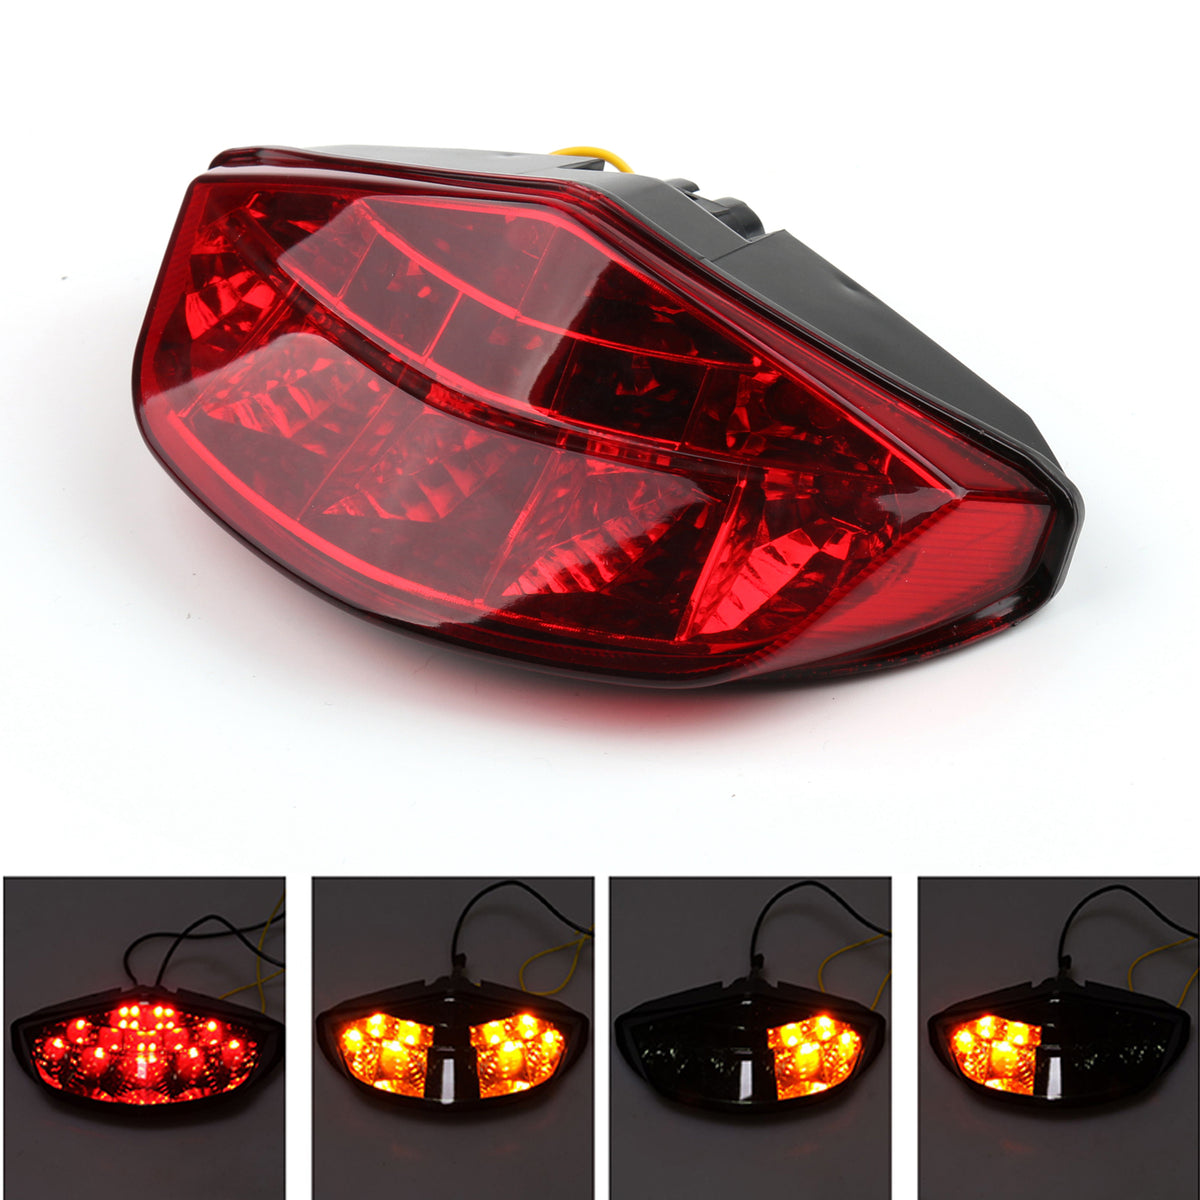 Integrated LED Tail Light Turn signals For DUCATI Monster 696 795 796 1100 Clear